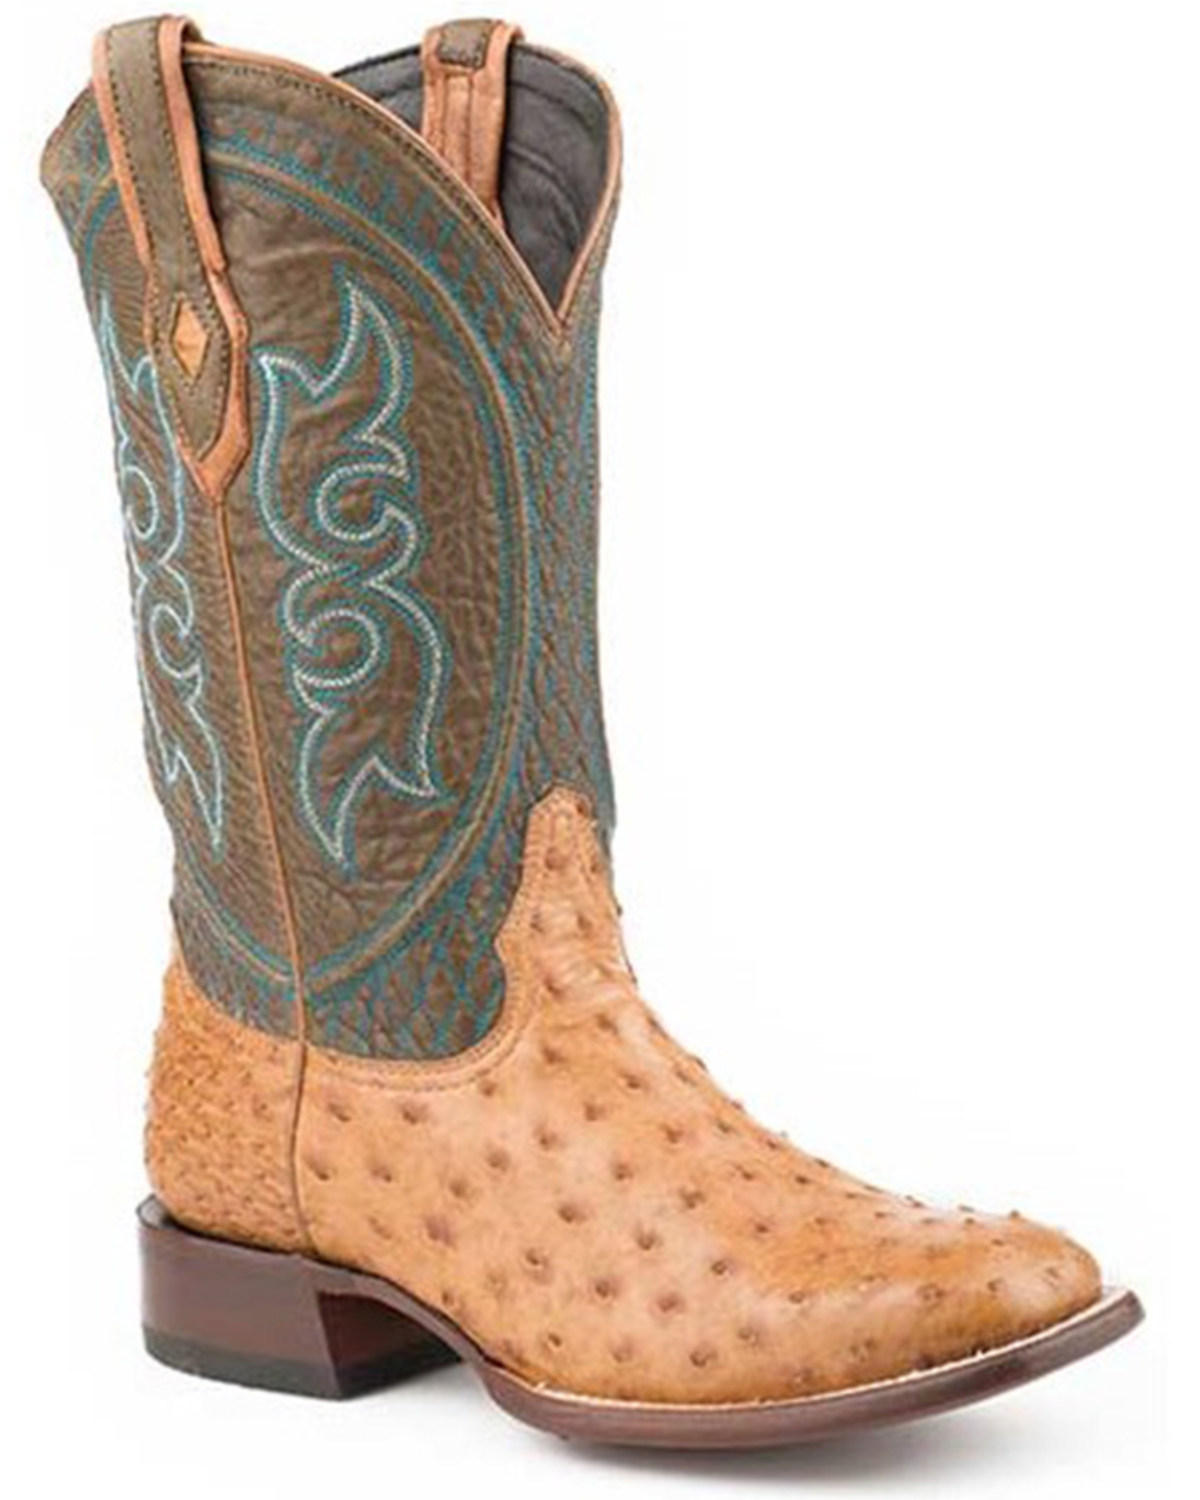 Stetson Men's Pablo Full-Quill Ostrich Exotic Western Boots - Square Toe